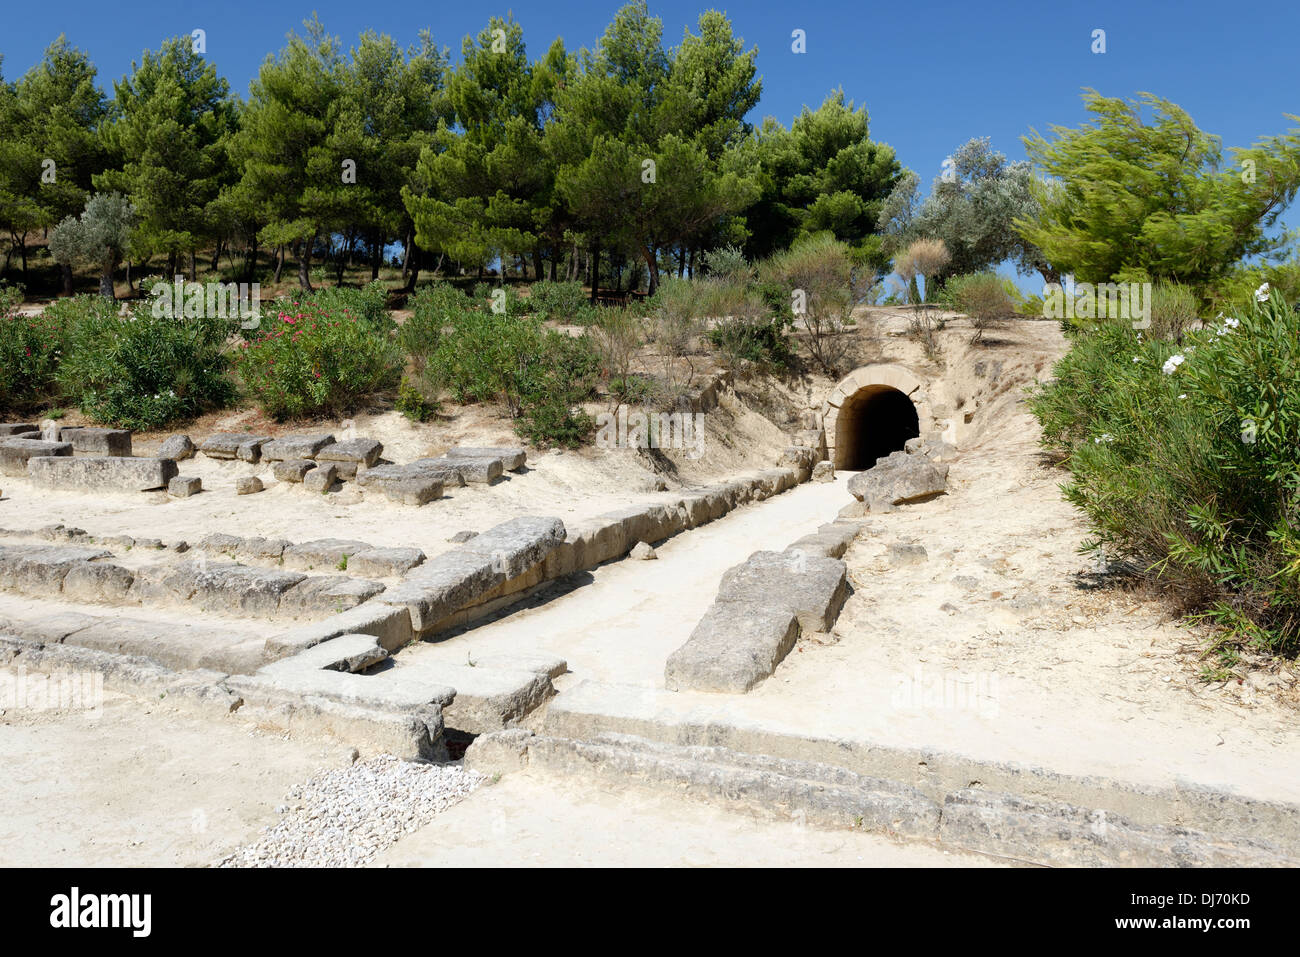 Arched limestone vaulted competitors entrance tunnel to the ancient stadium at Nemea Peloponnese Greece. Built in 320 BC, the tu Stock Photo